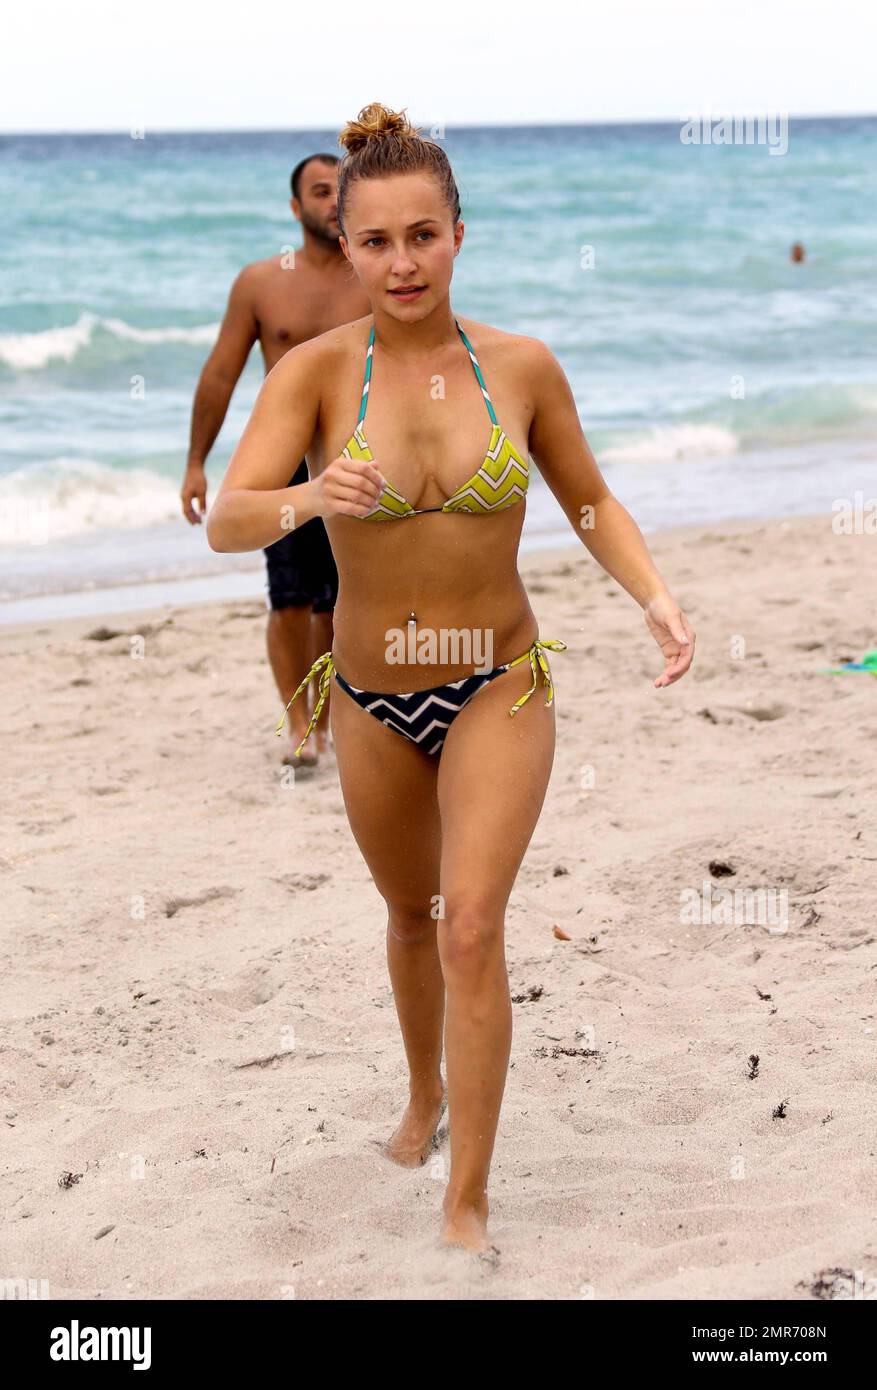 Hayden Panettiere spends Labour Day weekend with friends wearing a colorful  bikini and taking a dip in the ocean near her fiancé's beach home.  Hollywood Beach, FL. 1st September 2013 Stock Photo -